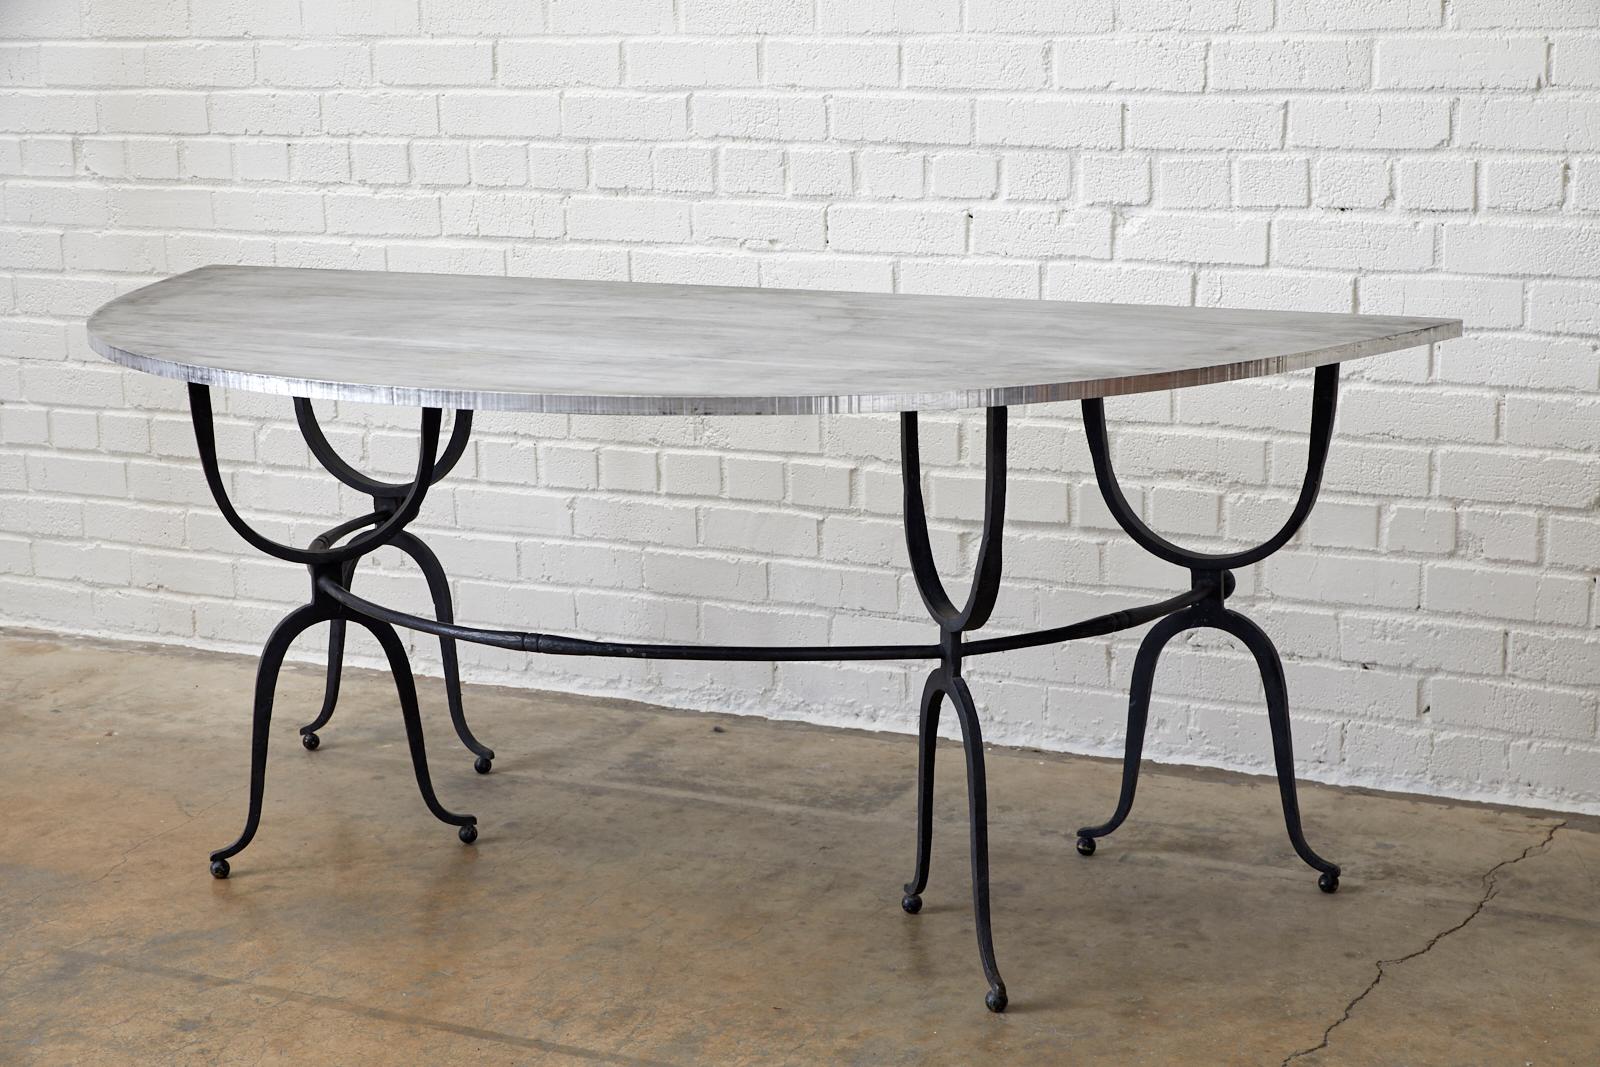 Fantastic Italian demilune table having a newer steel top. Originally constructed as a hunt table or wine tasting table with a wood or marble top. The iron base is made of four pairs of supports conjoined by a curved rod. Elegantly curved legs